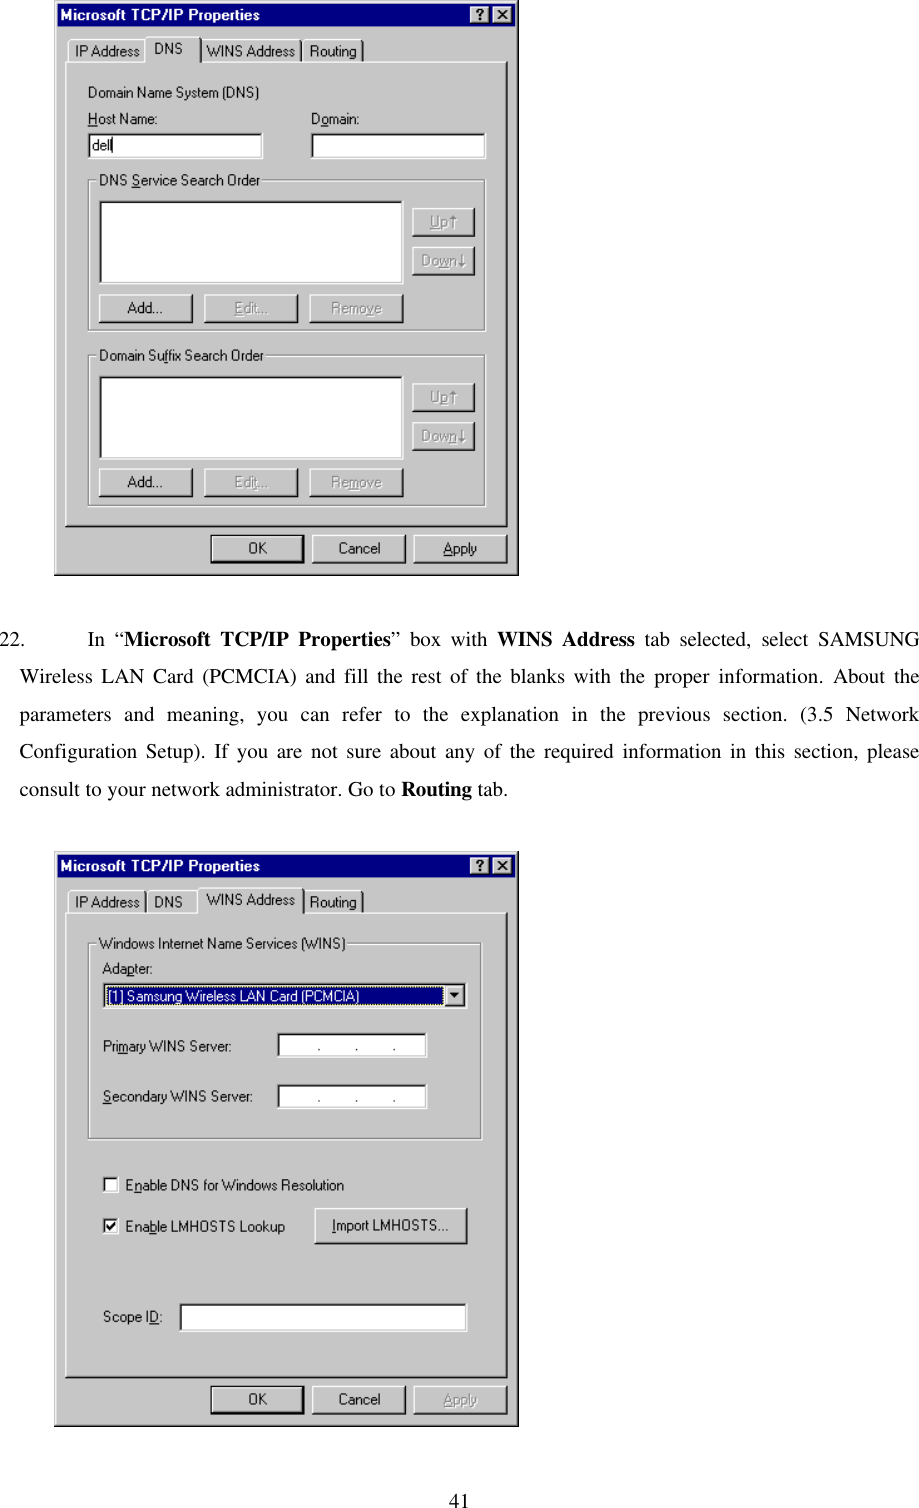 41          22. In “Microsoft TCP/IP Properties” box with WINS Address tab selected, select SAMSUNGWireless LAN Card (PCMCIA) and fill the rest of the blanks with the proper information. About theparameters and meaning, you can refer to the explanation in the previous section. (3.5 NetworkConfiguration Setup). If you are not sure about any of the required information in this section, pleaseconsult to your network administrator. Go to Routing tab.          